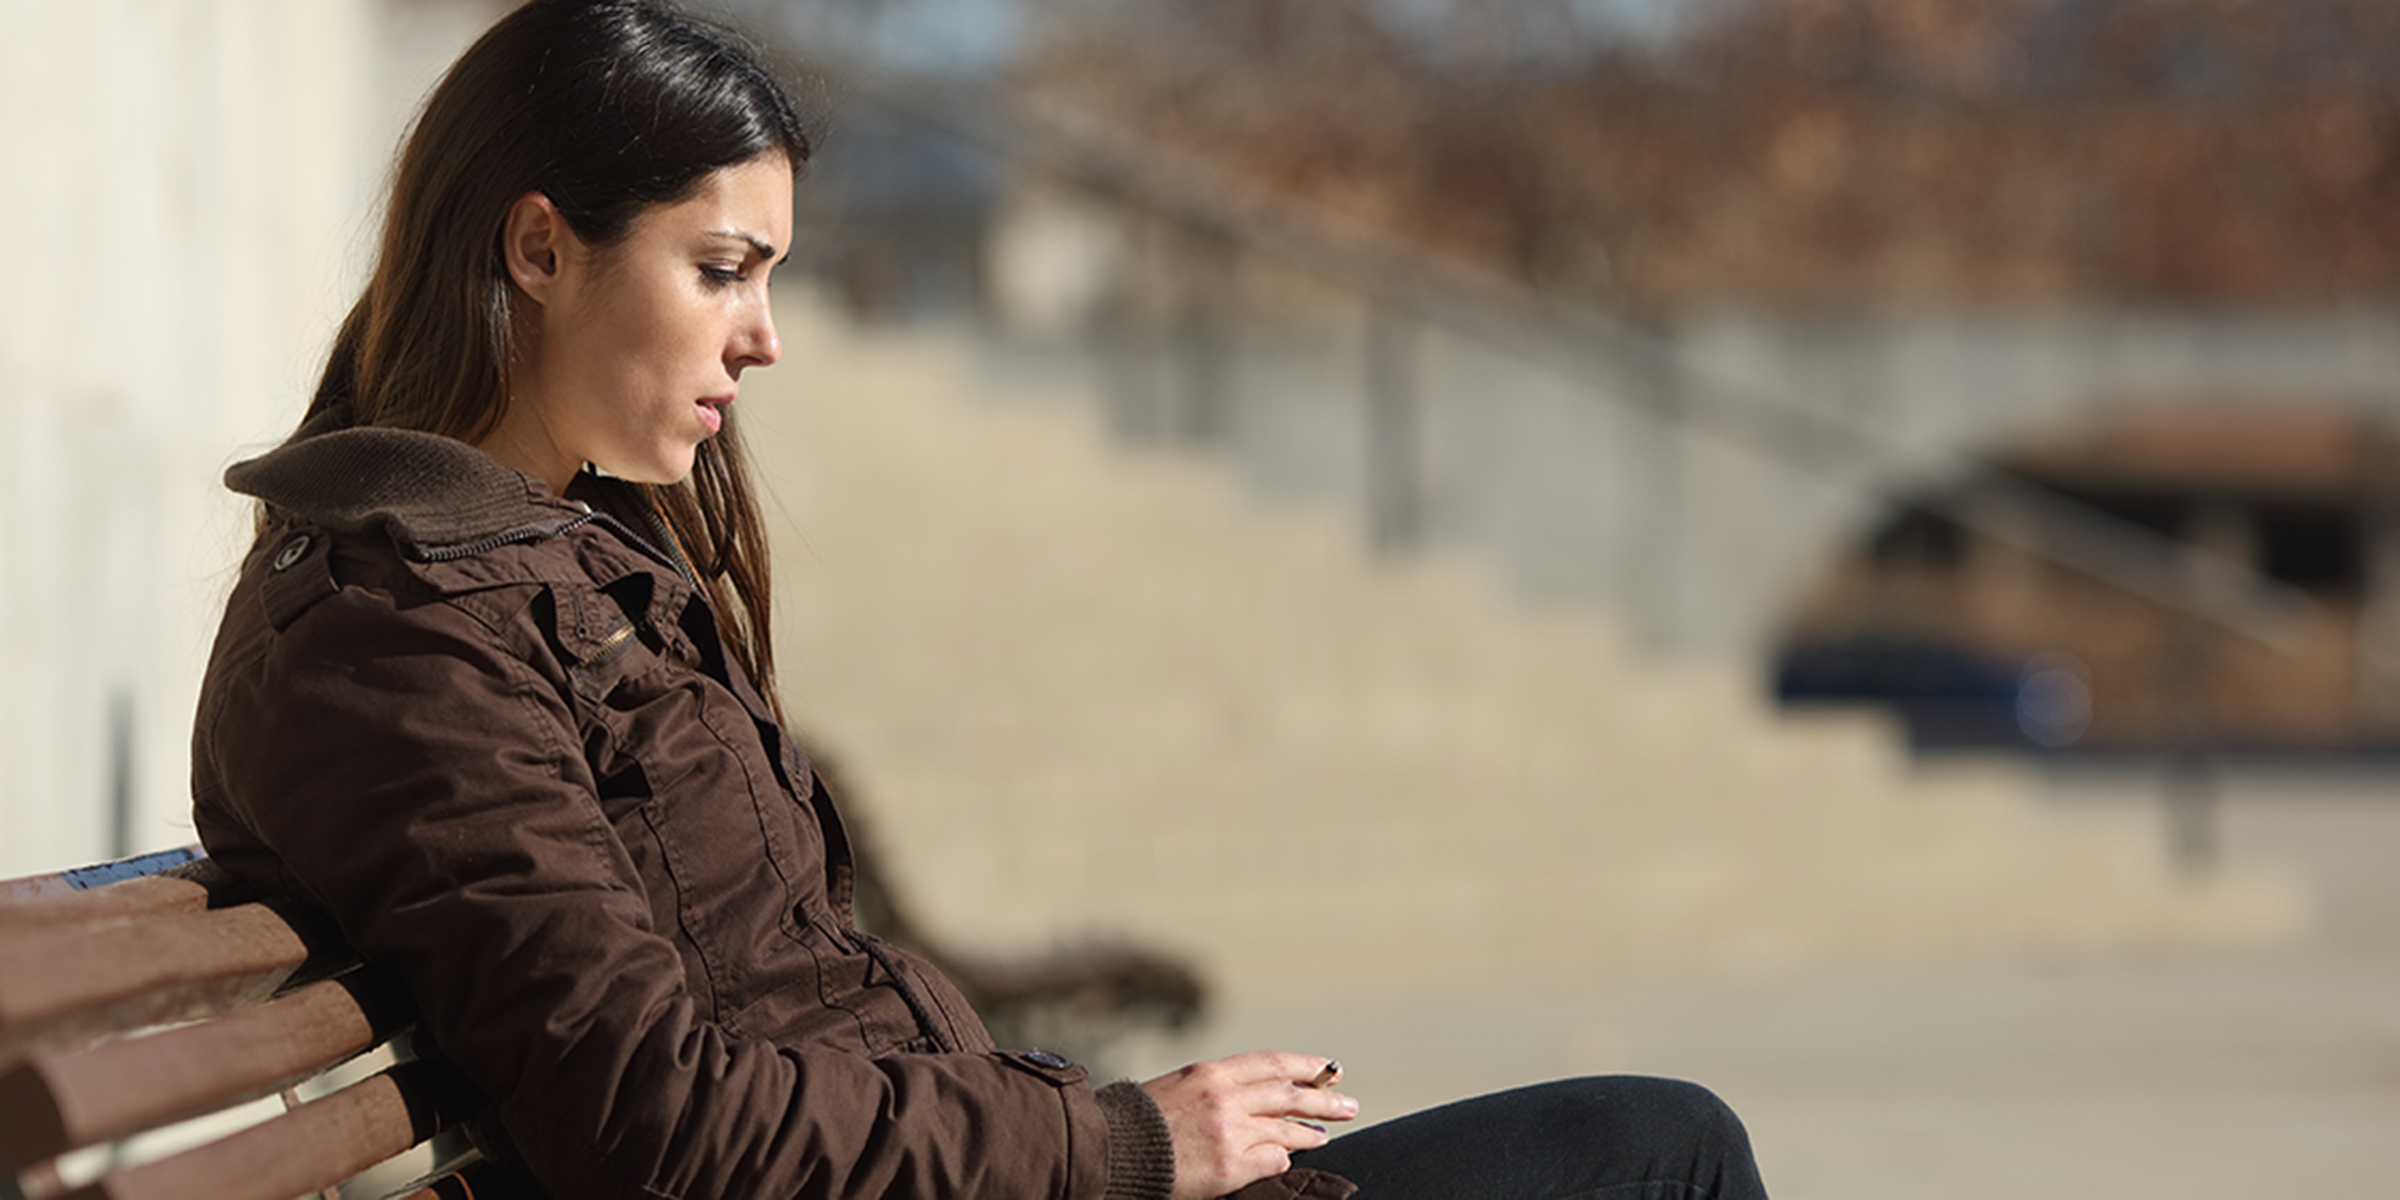 Serious young woman sitting on a bench outdoors